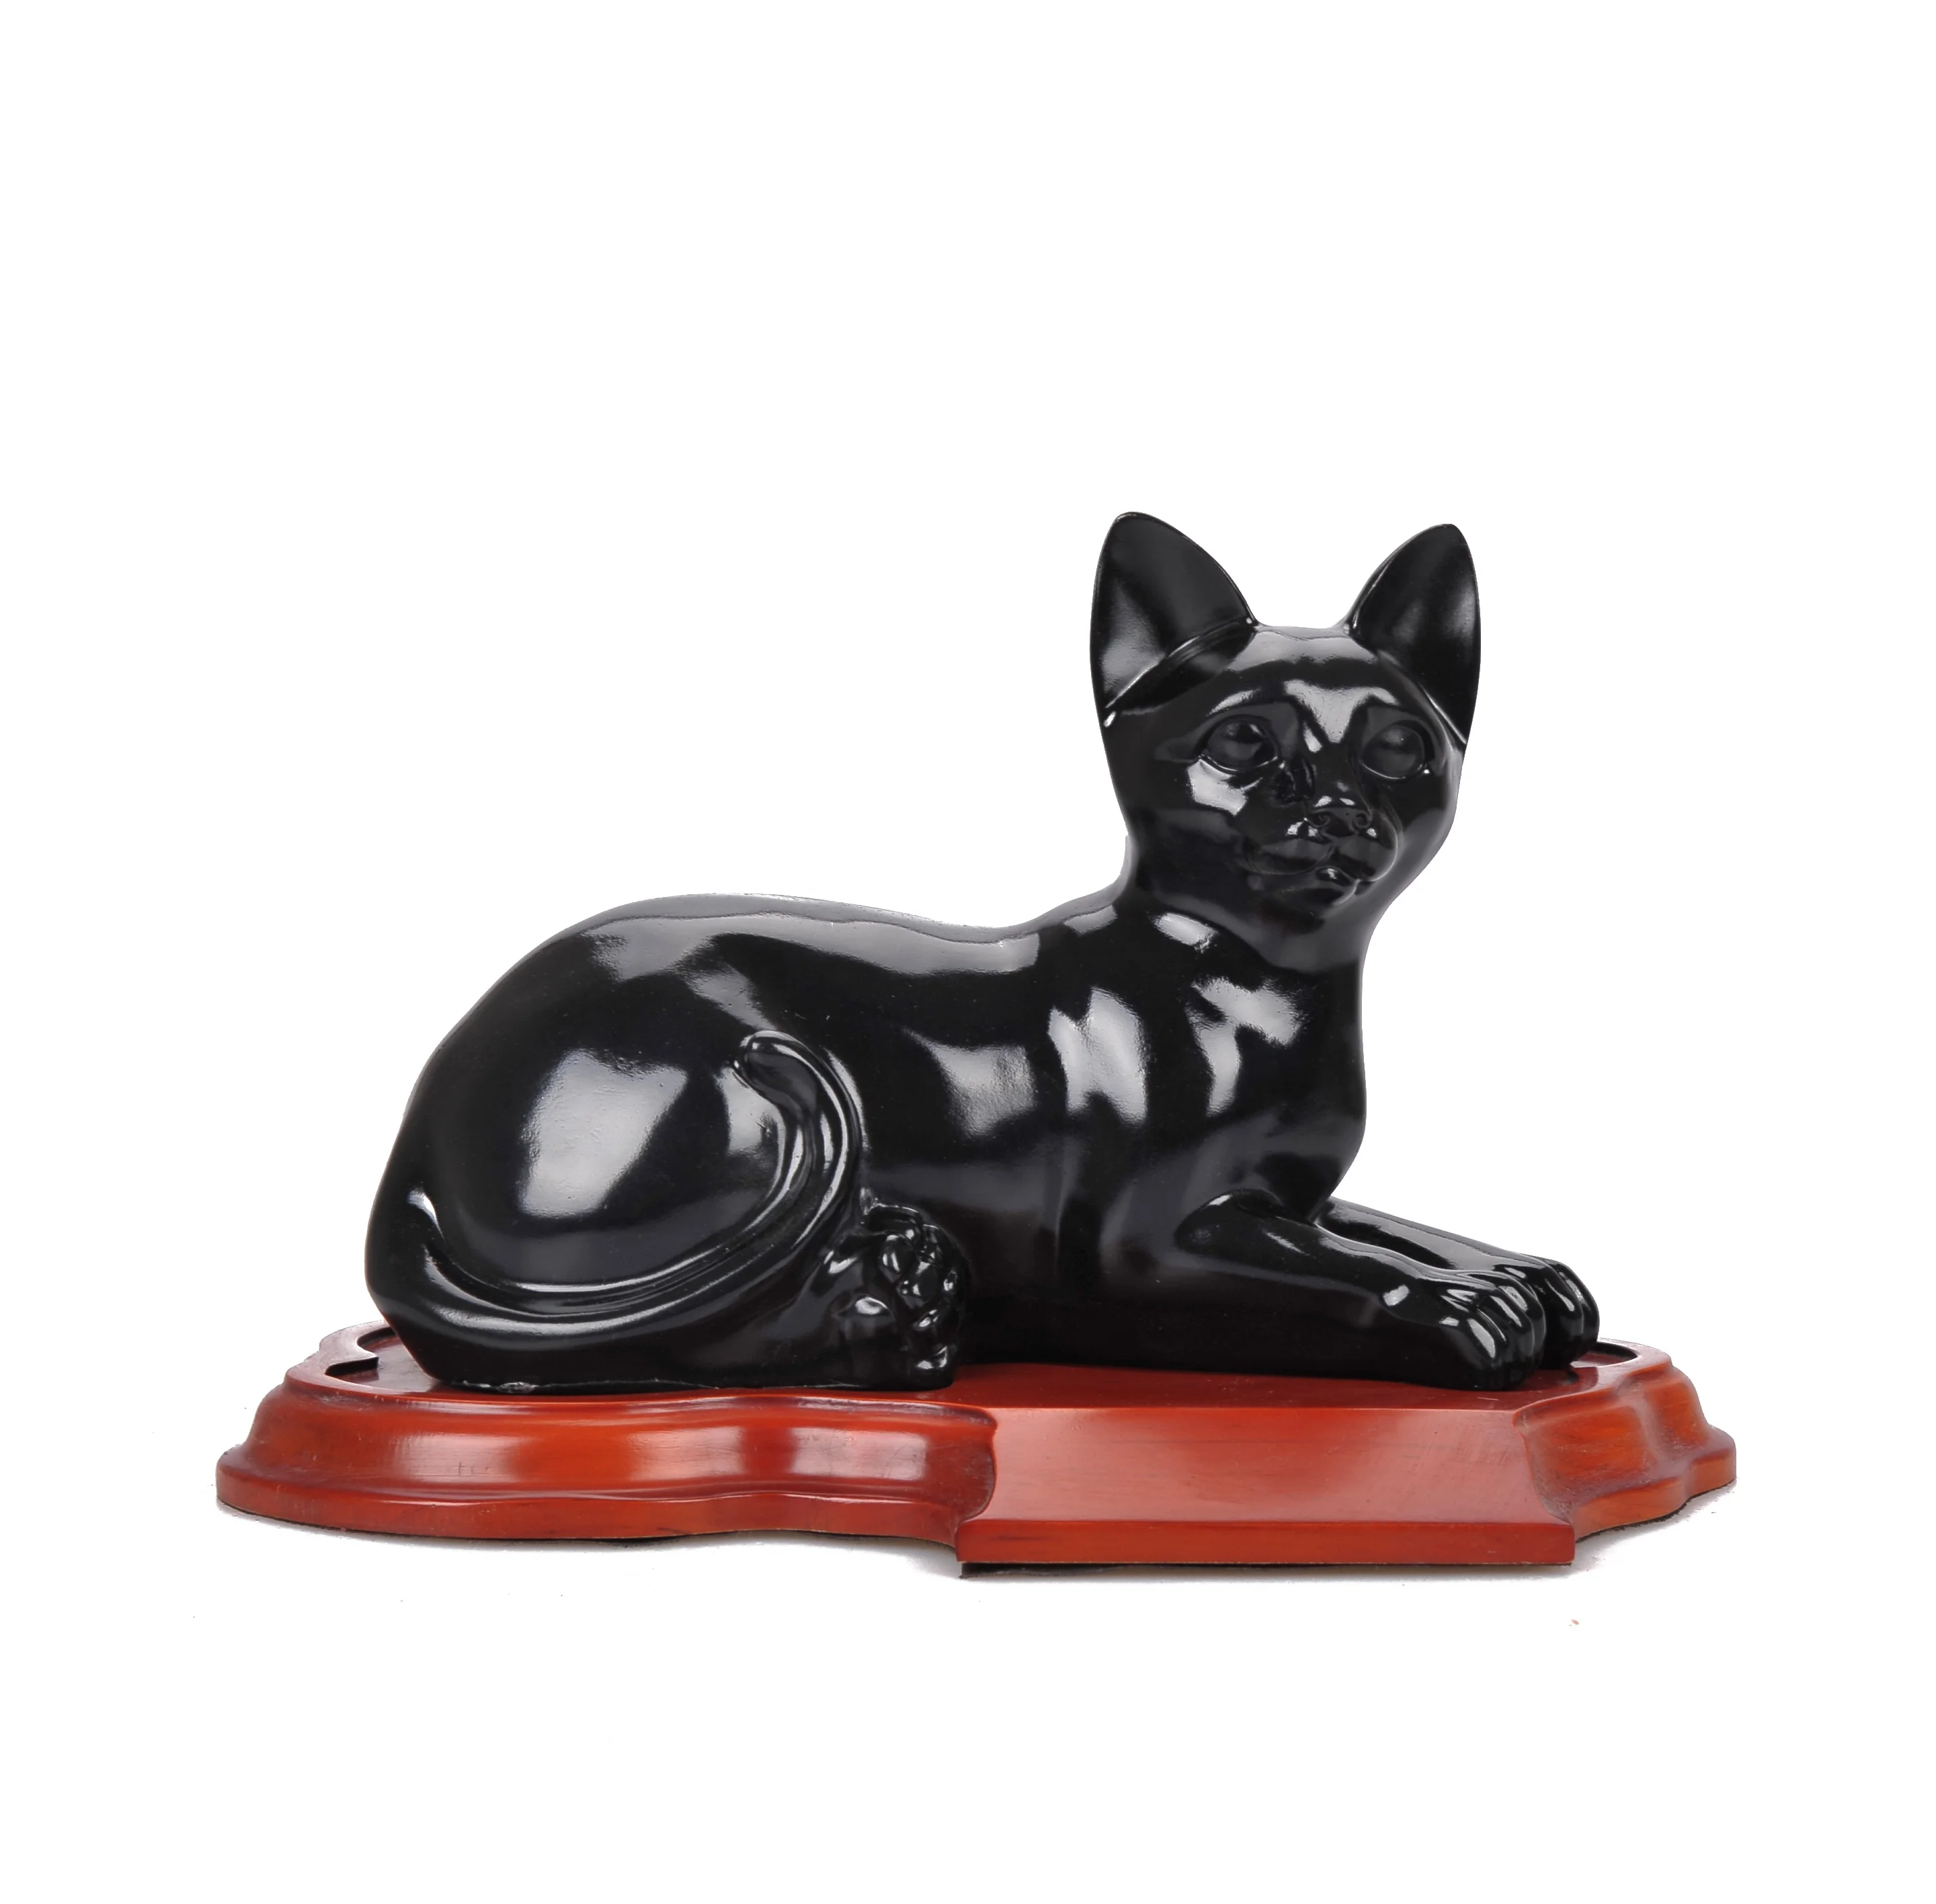 

Funeral Supplies MKYB026 Cat Statue Urn Pet Memorials Wholesale Pet Urns For Ashes, Black/white